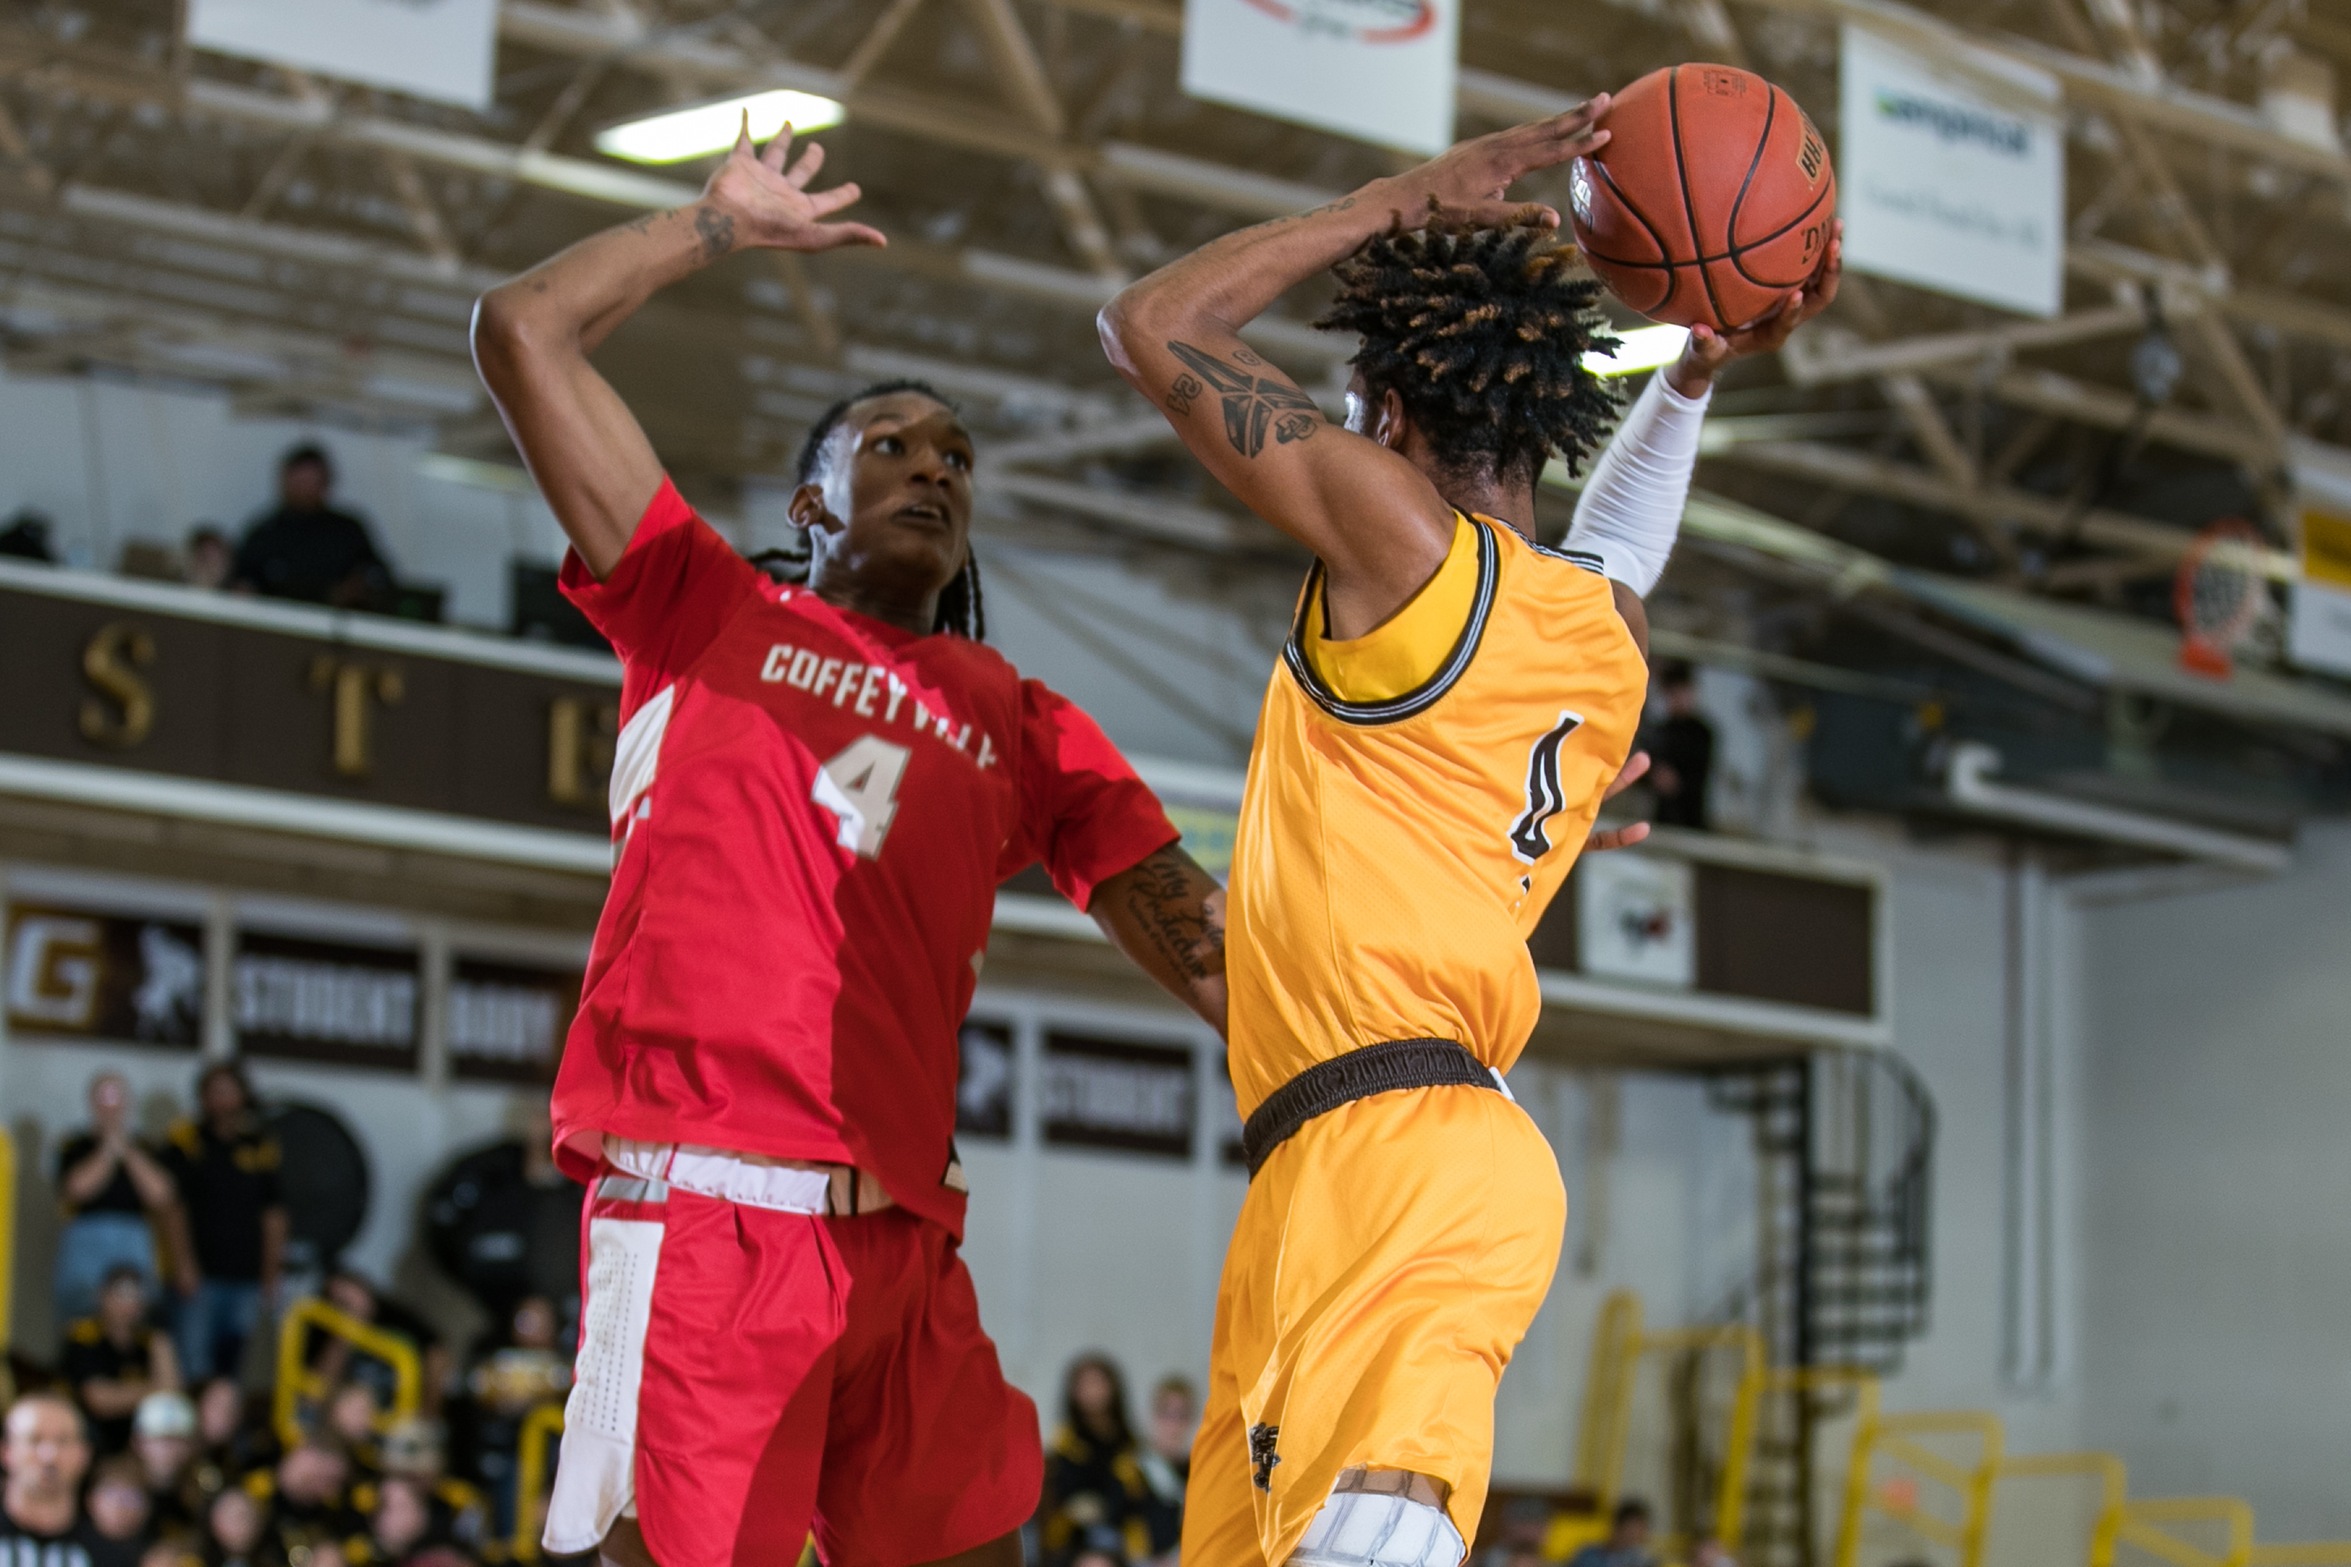 Broncbusters fall short; lose to Coffeyville for second time